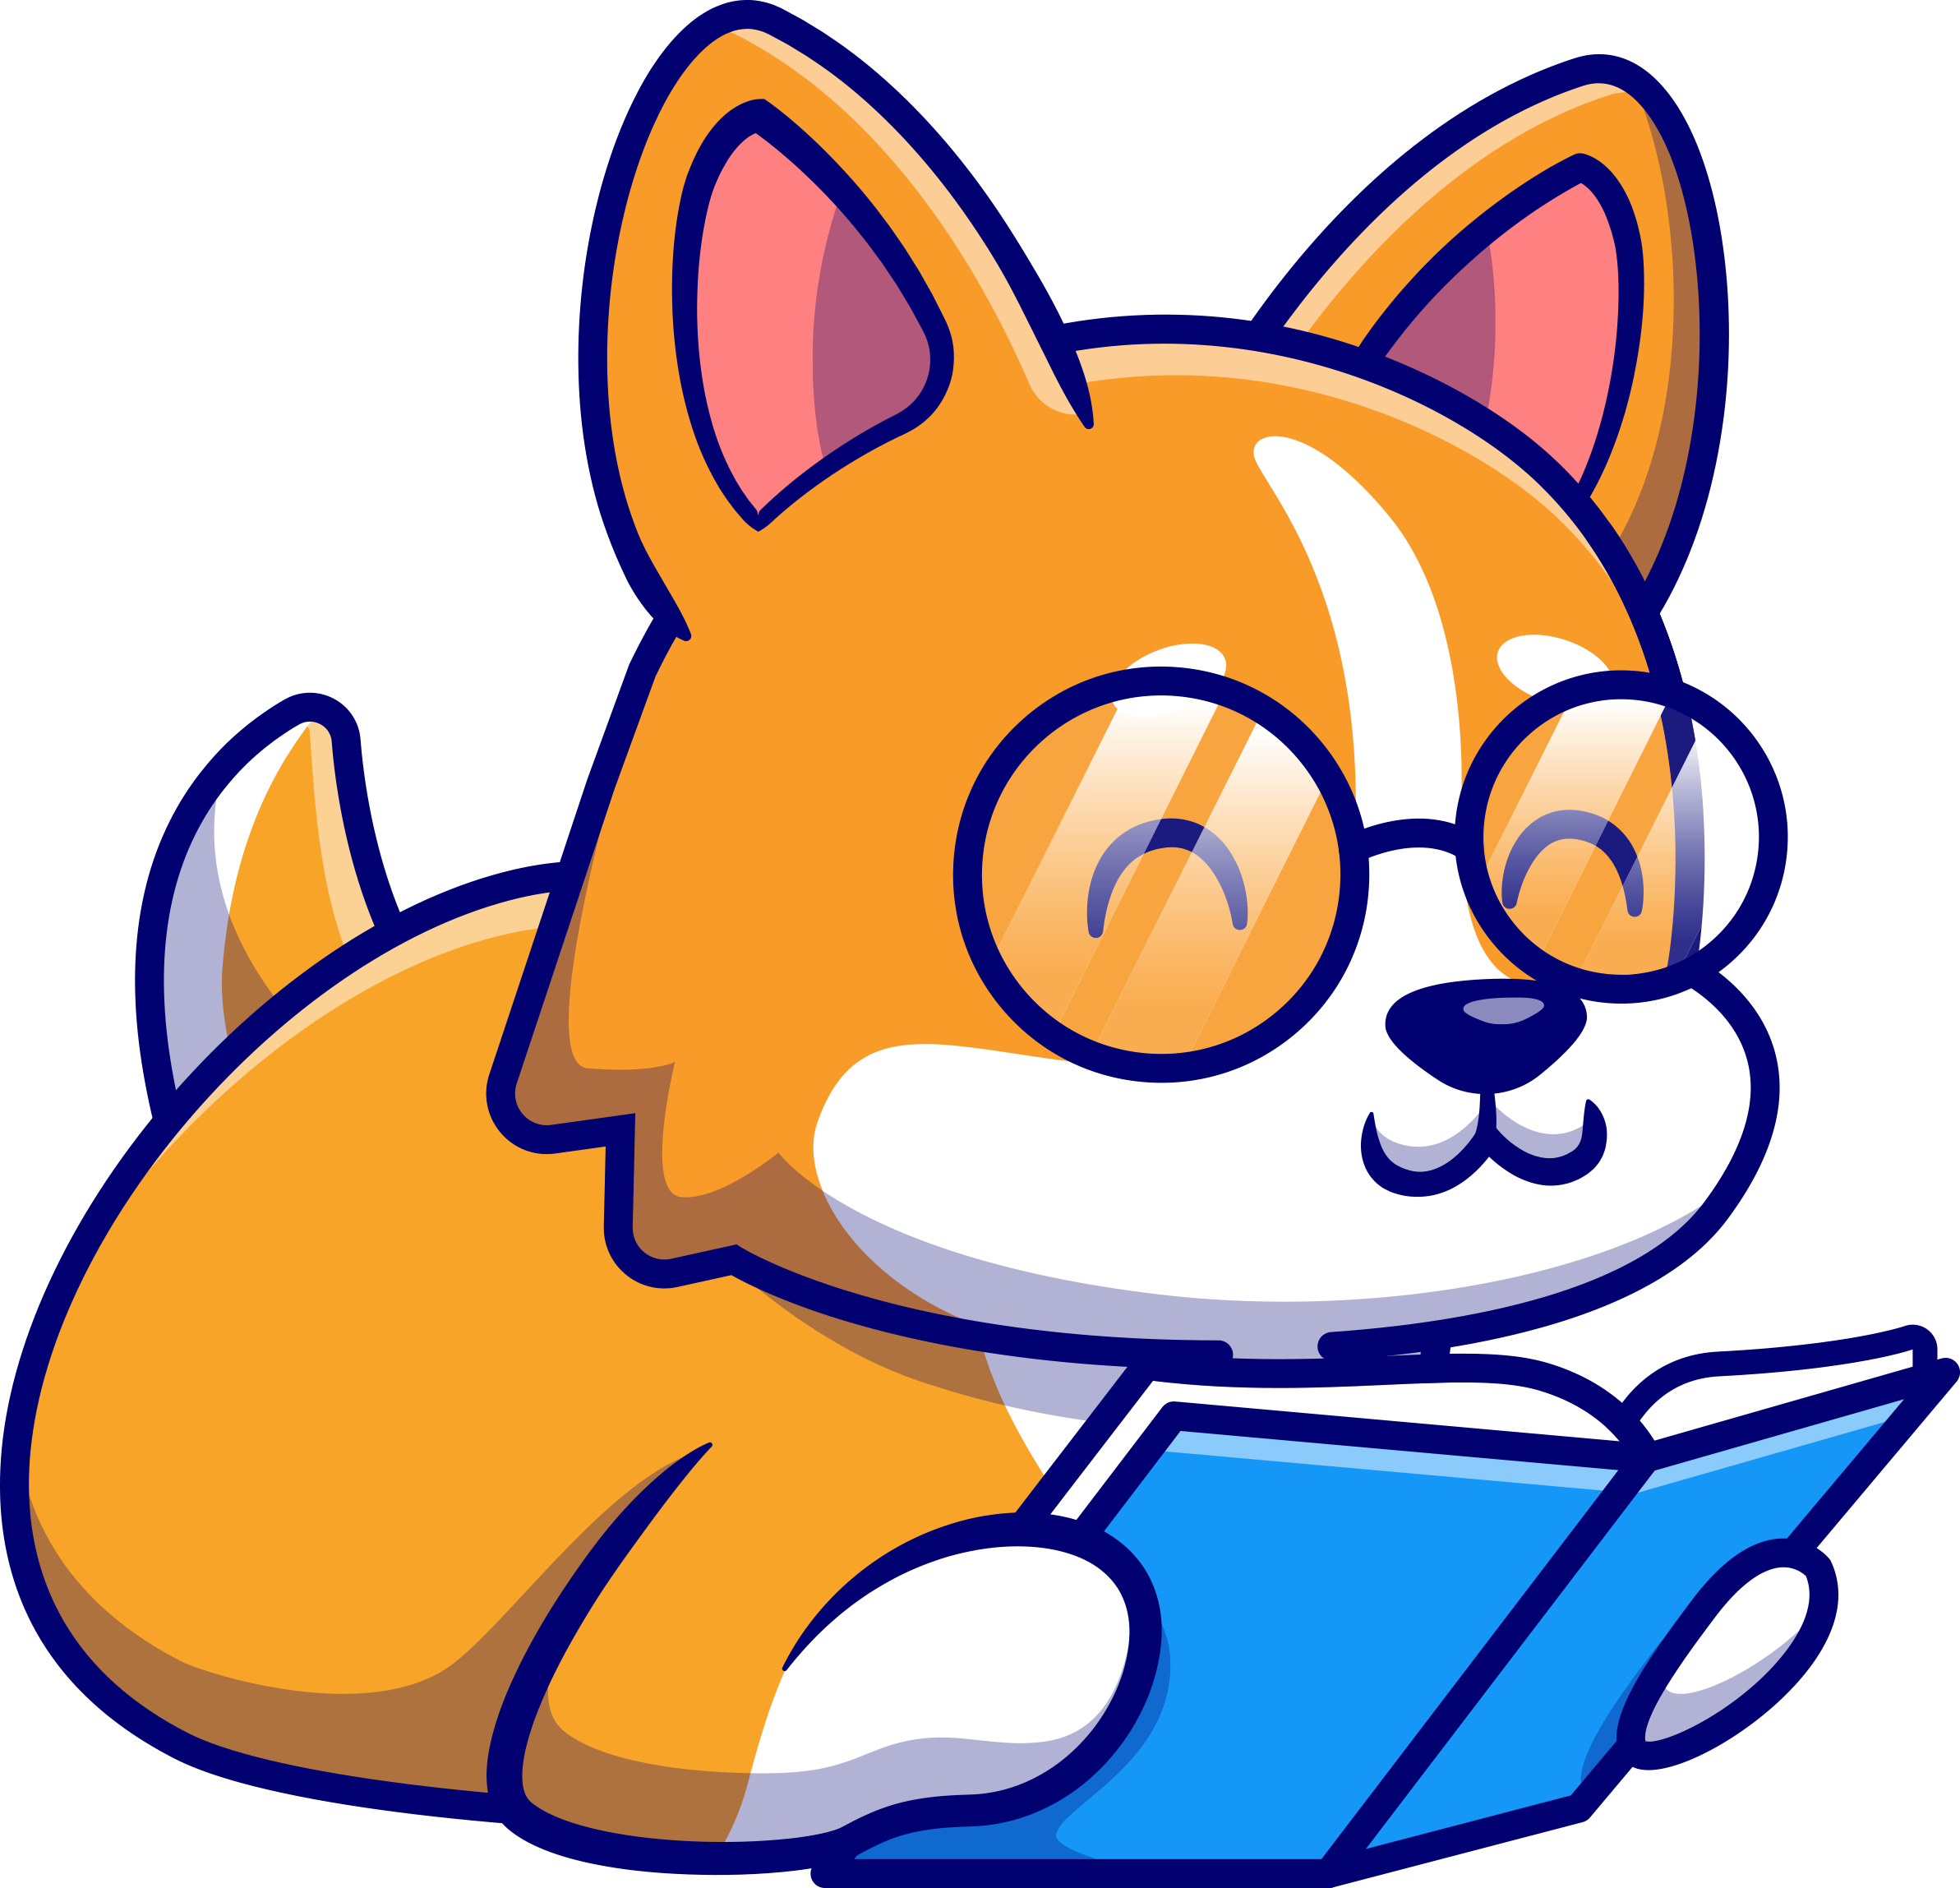 Illustration of a cute corgi wearing glasses and reading a book.